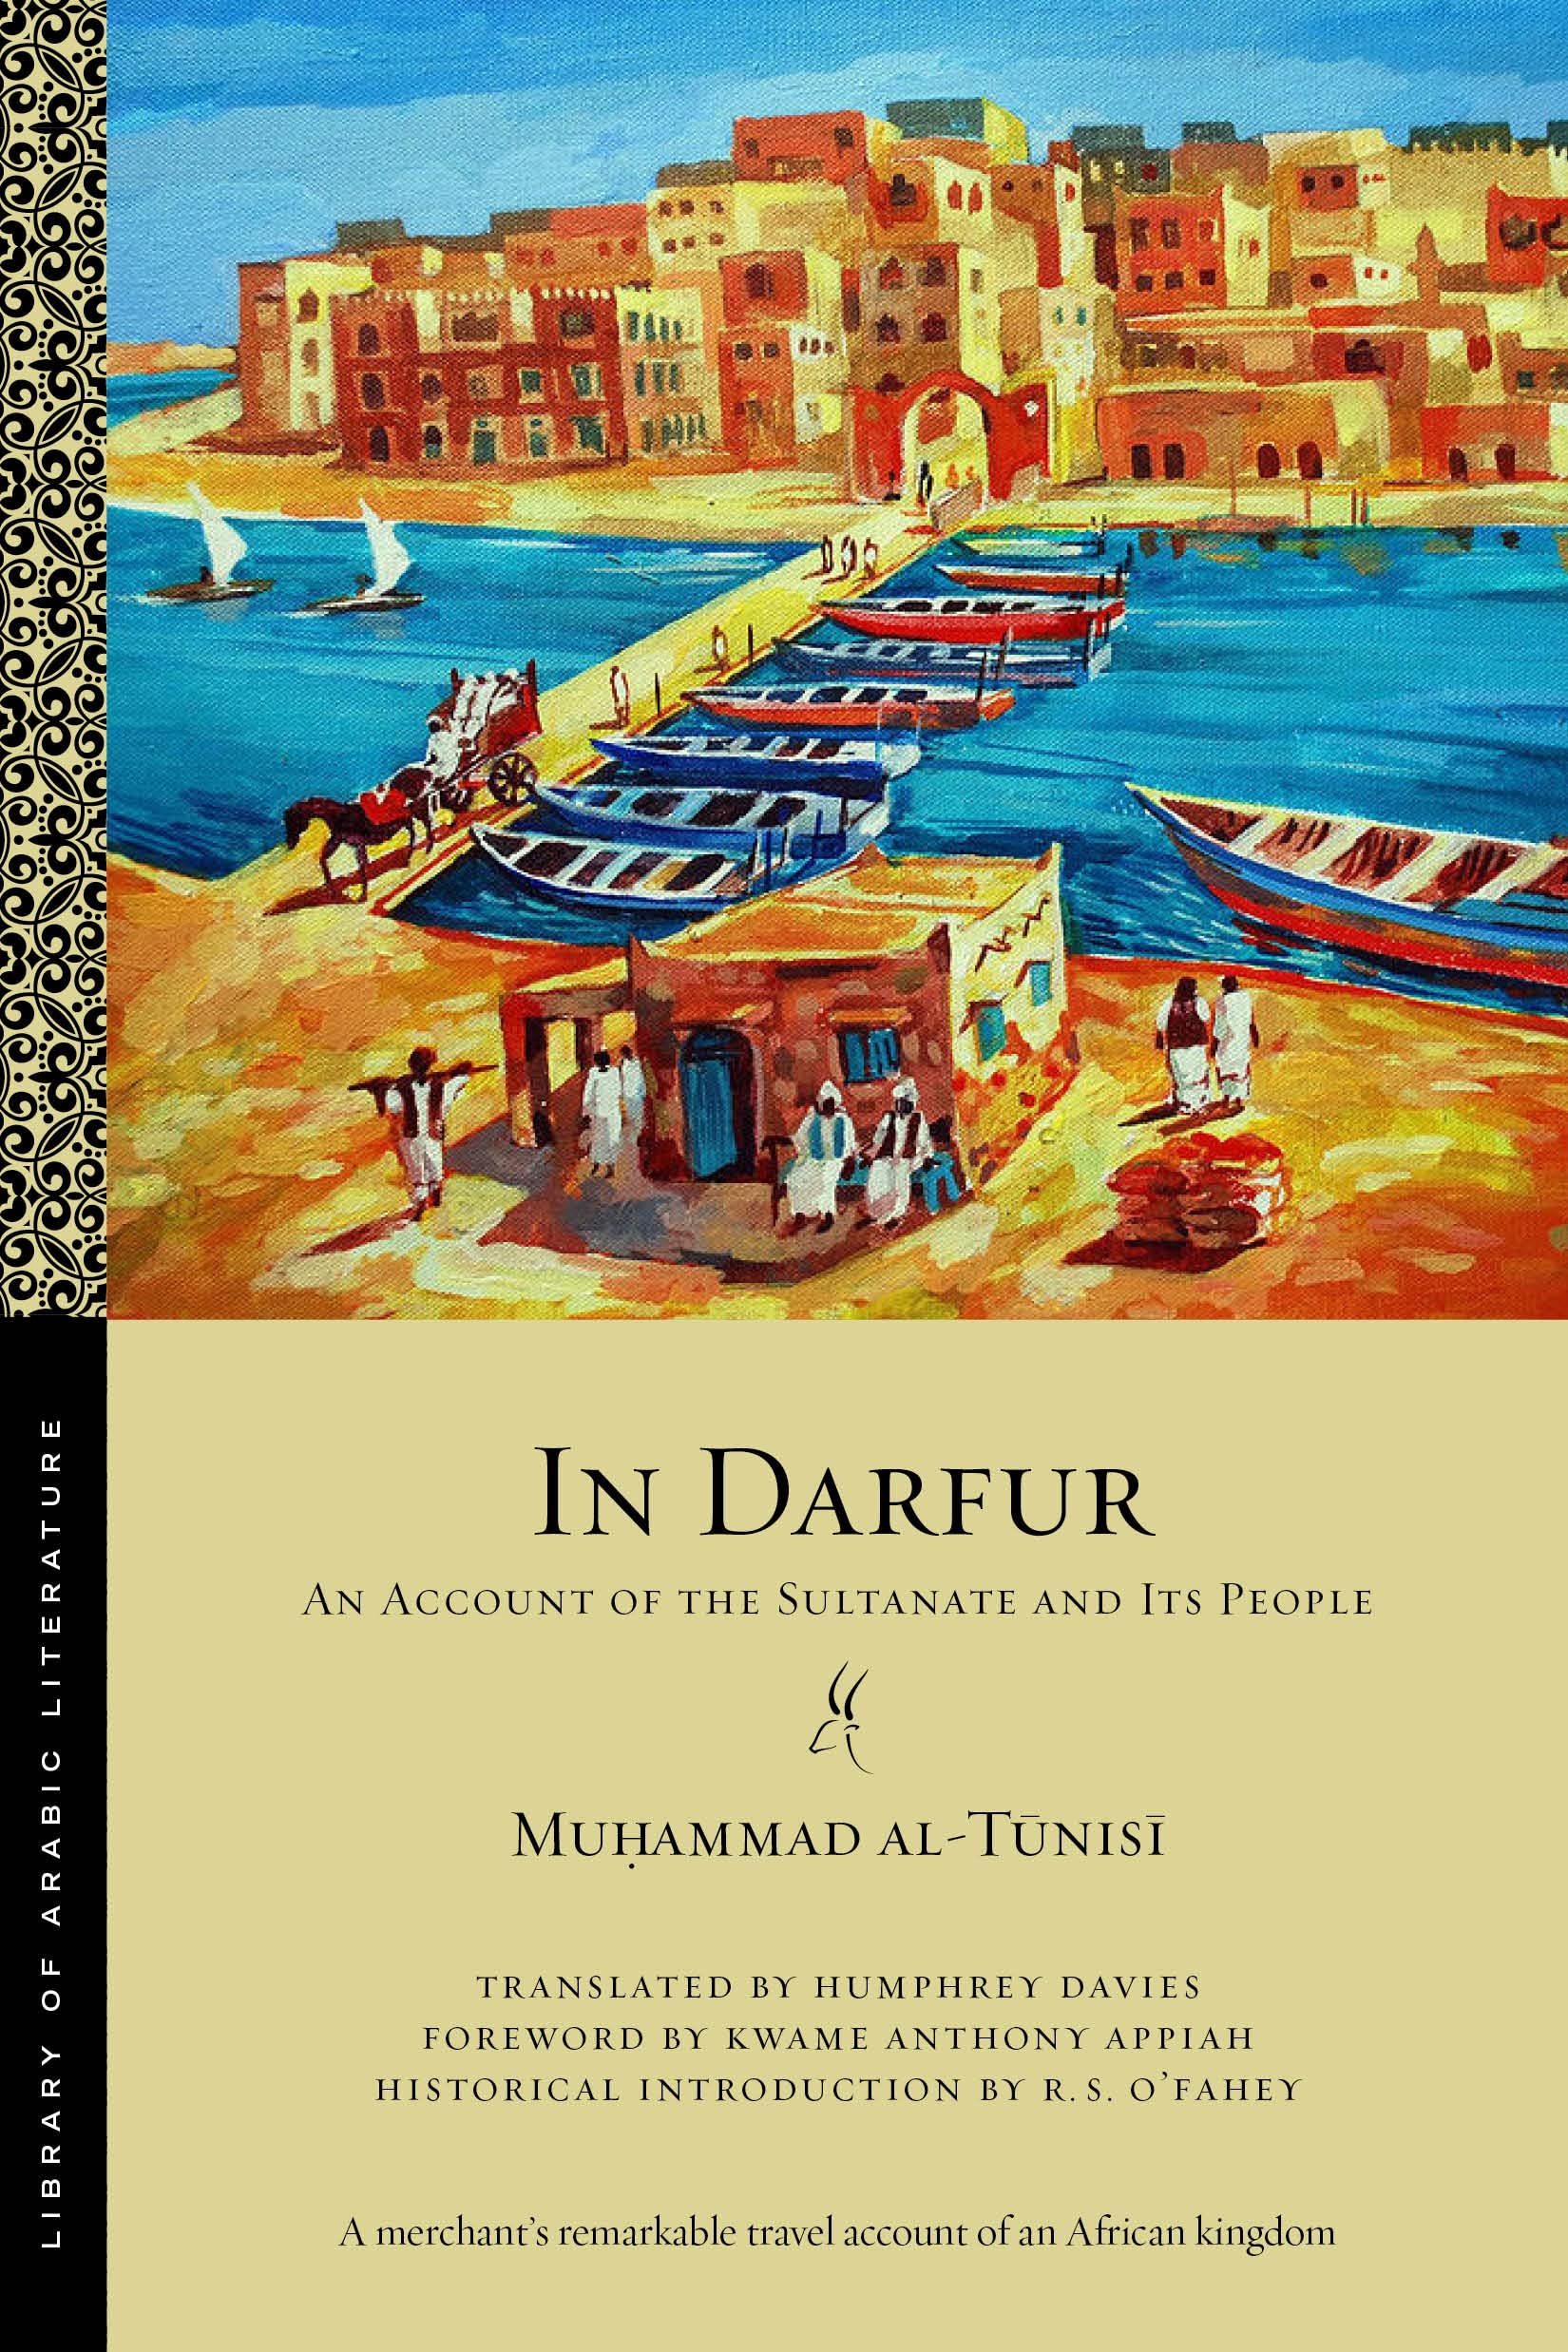 In Darfur: An Account of the Sultanate and Its People, Volume One